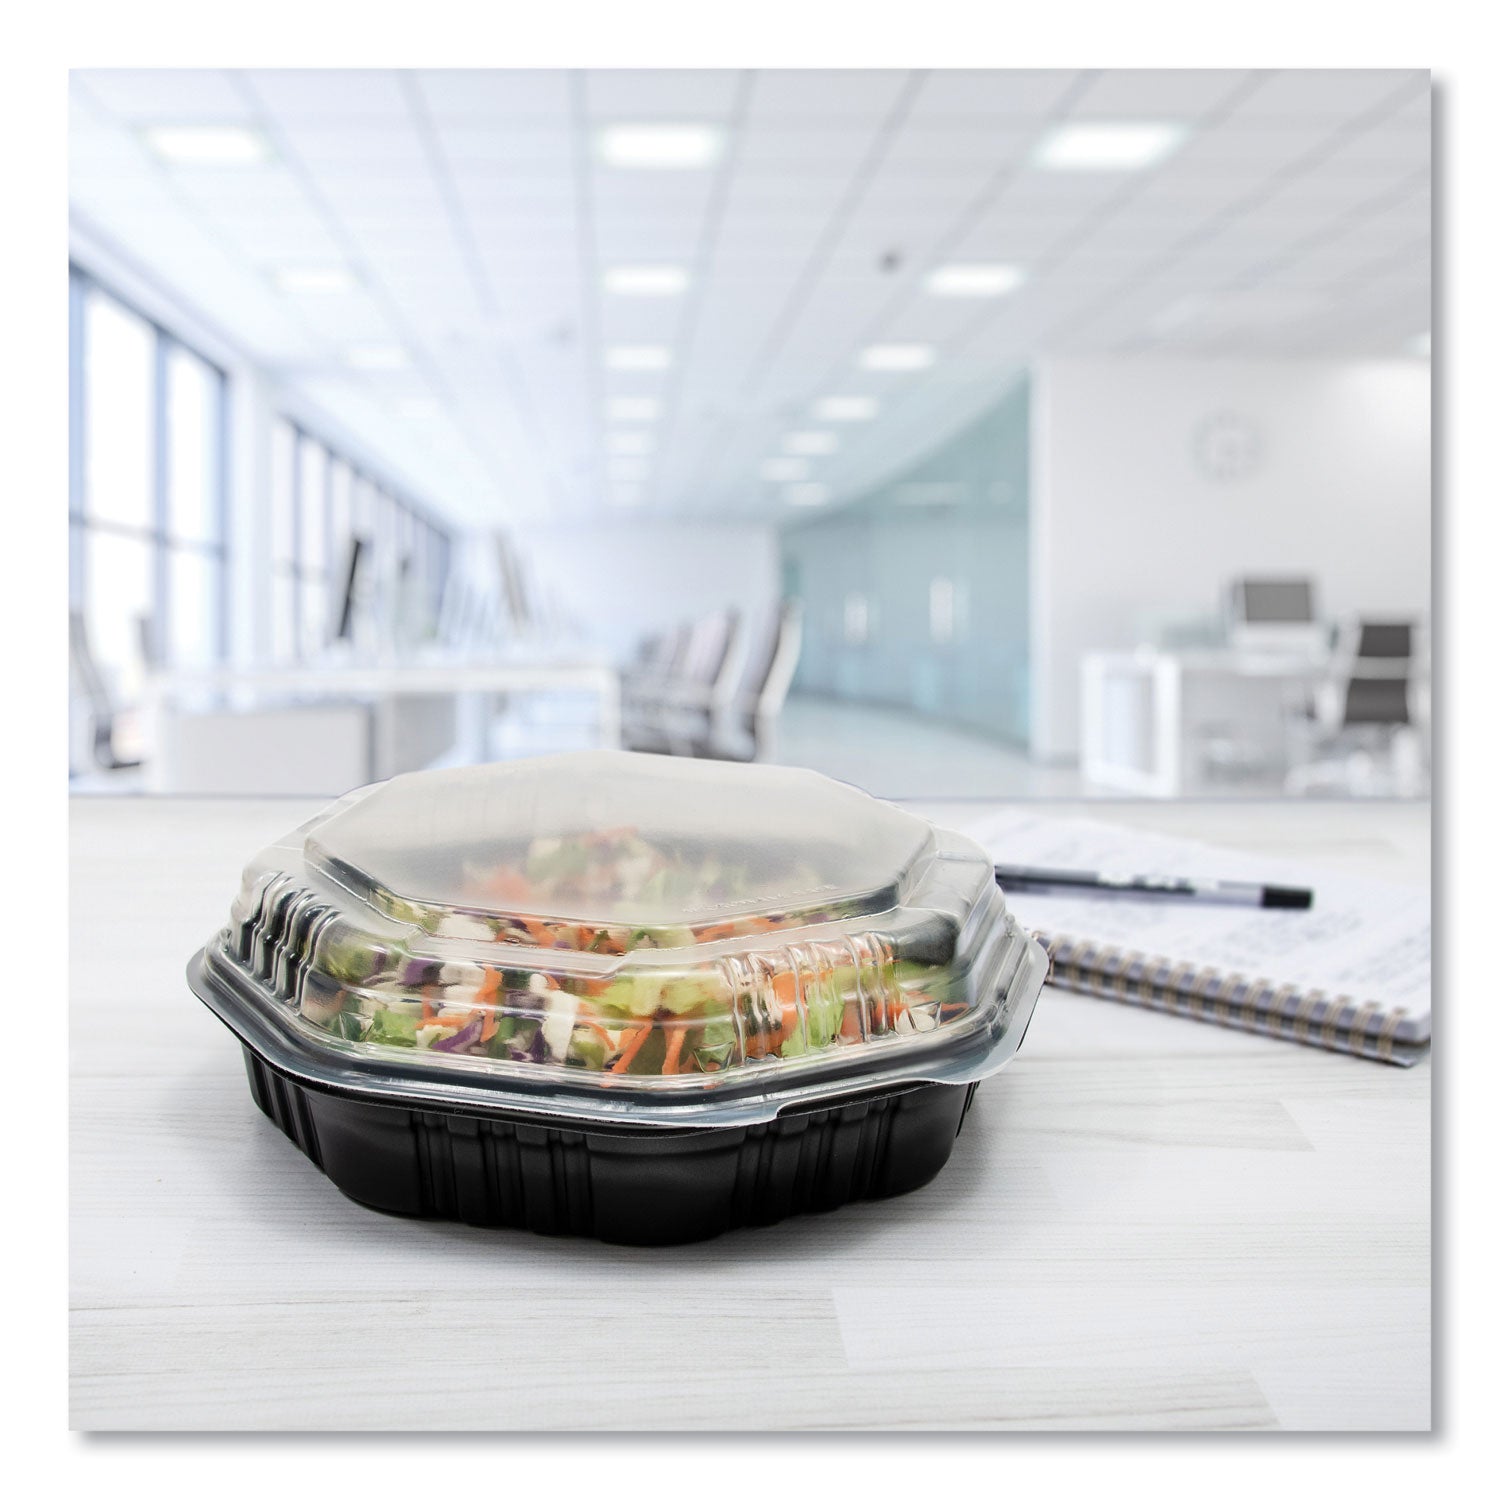 octaview-hinged-lid-hot-food-containers-31-oz-955-x-91-x-3-black-clear-plastic-100-carton_scc809011pp94 - 4